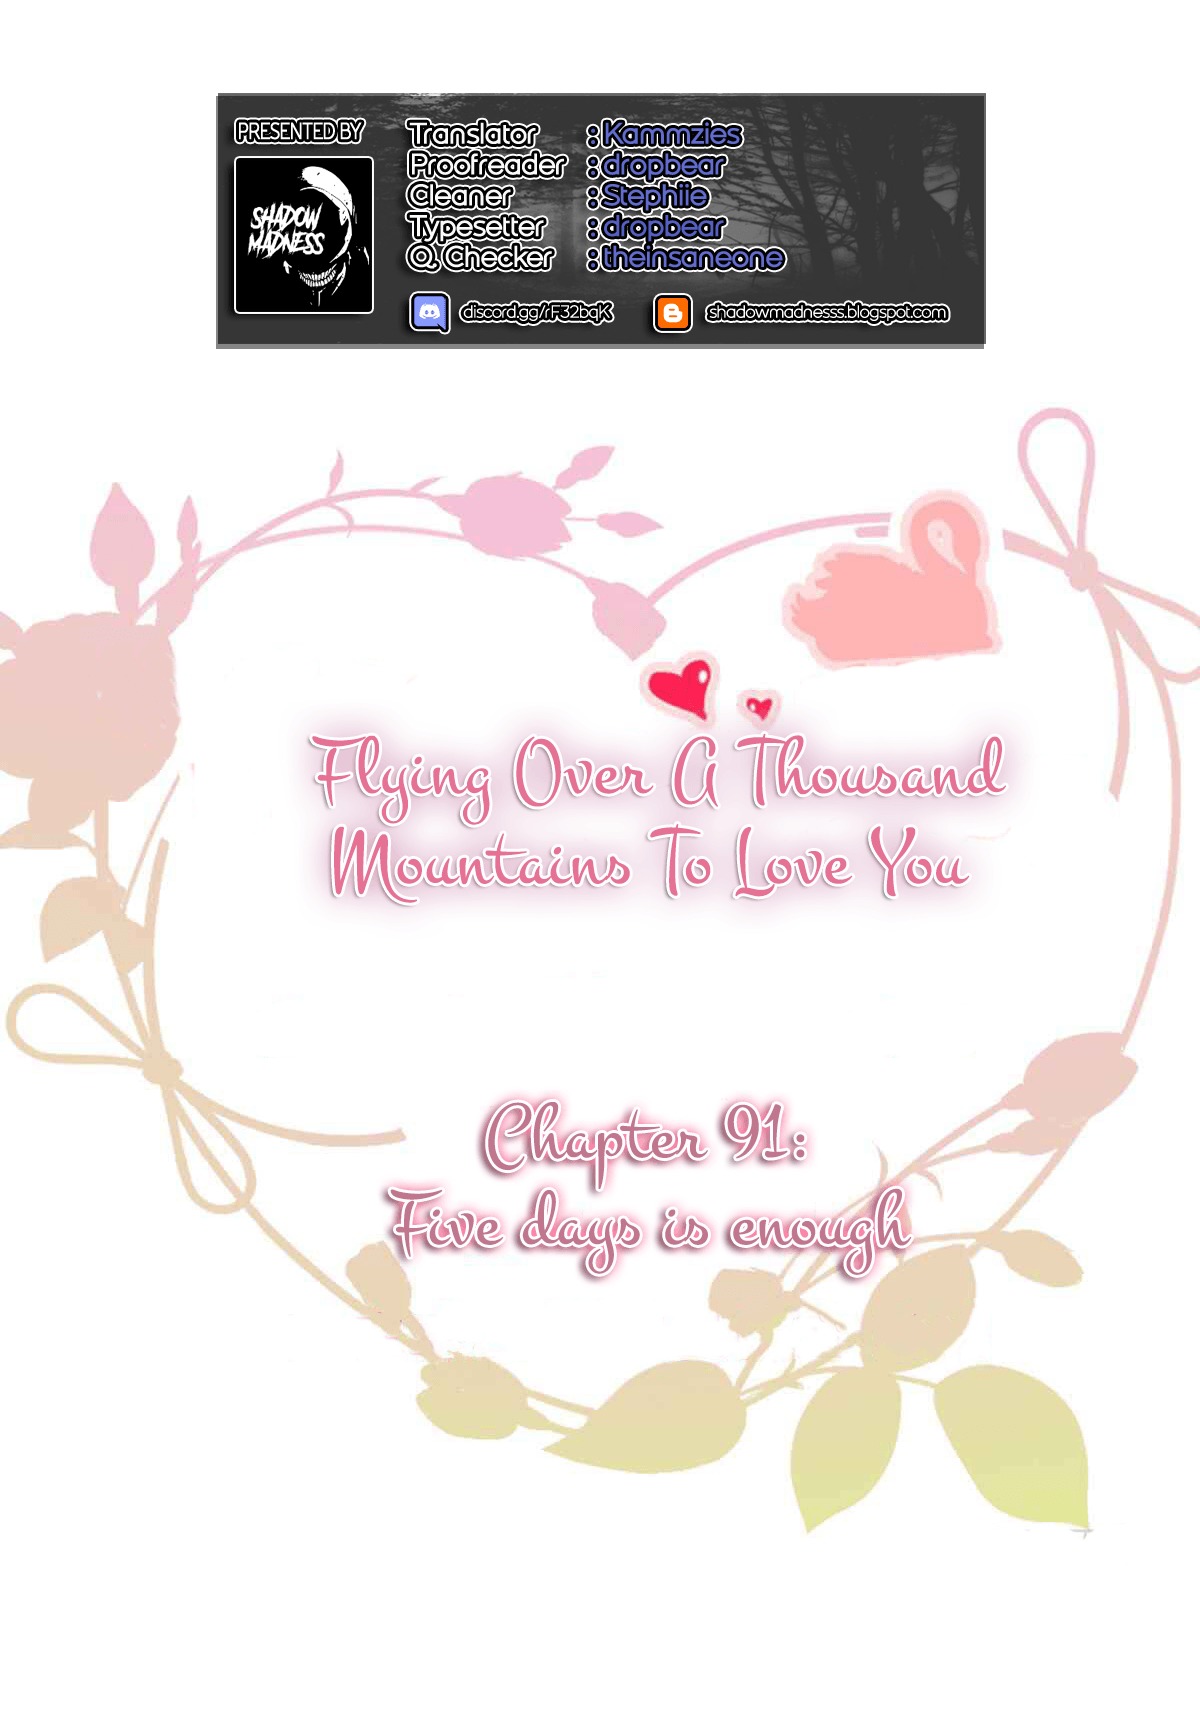 Flying Over a Thousand Mountains to Love You ch.91